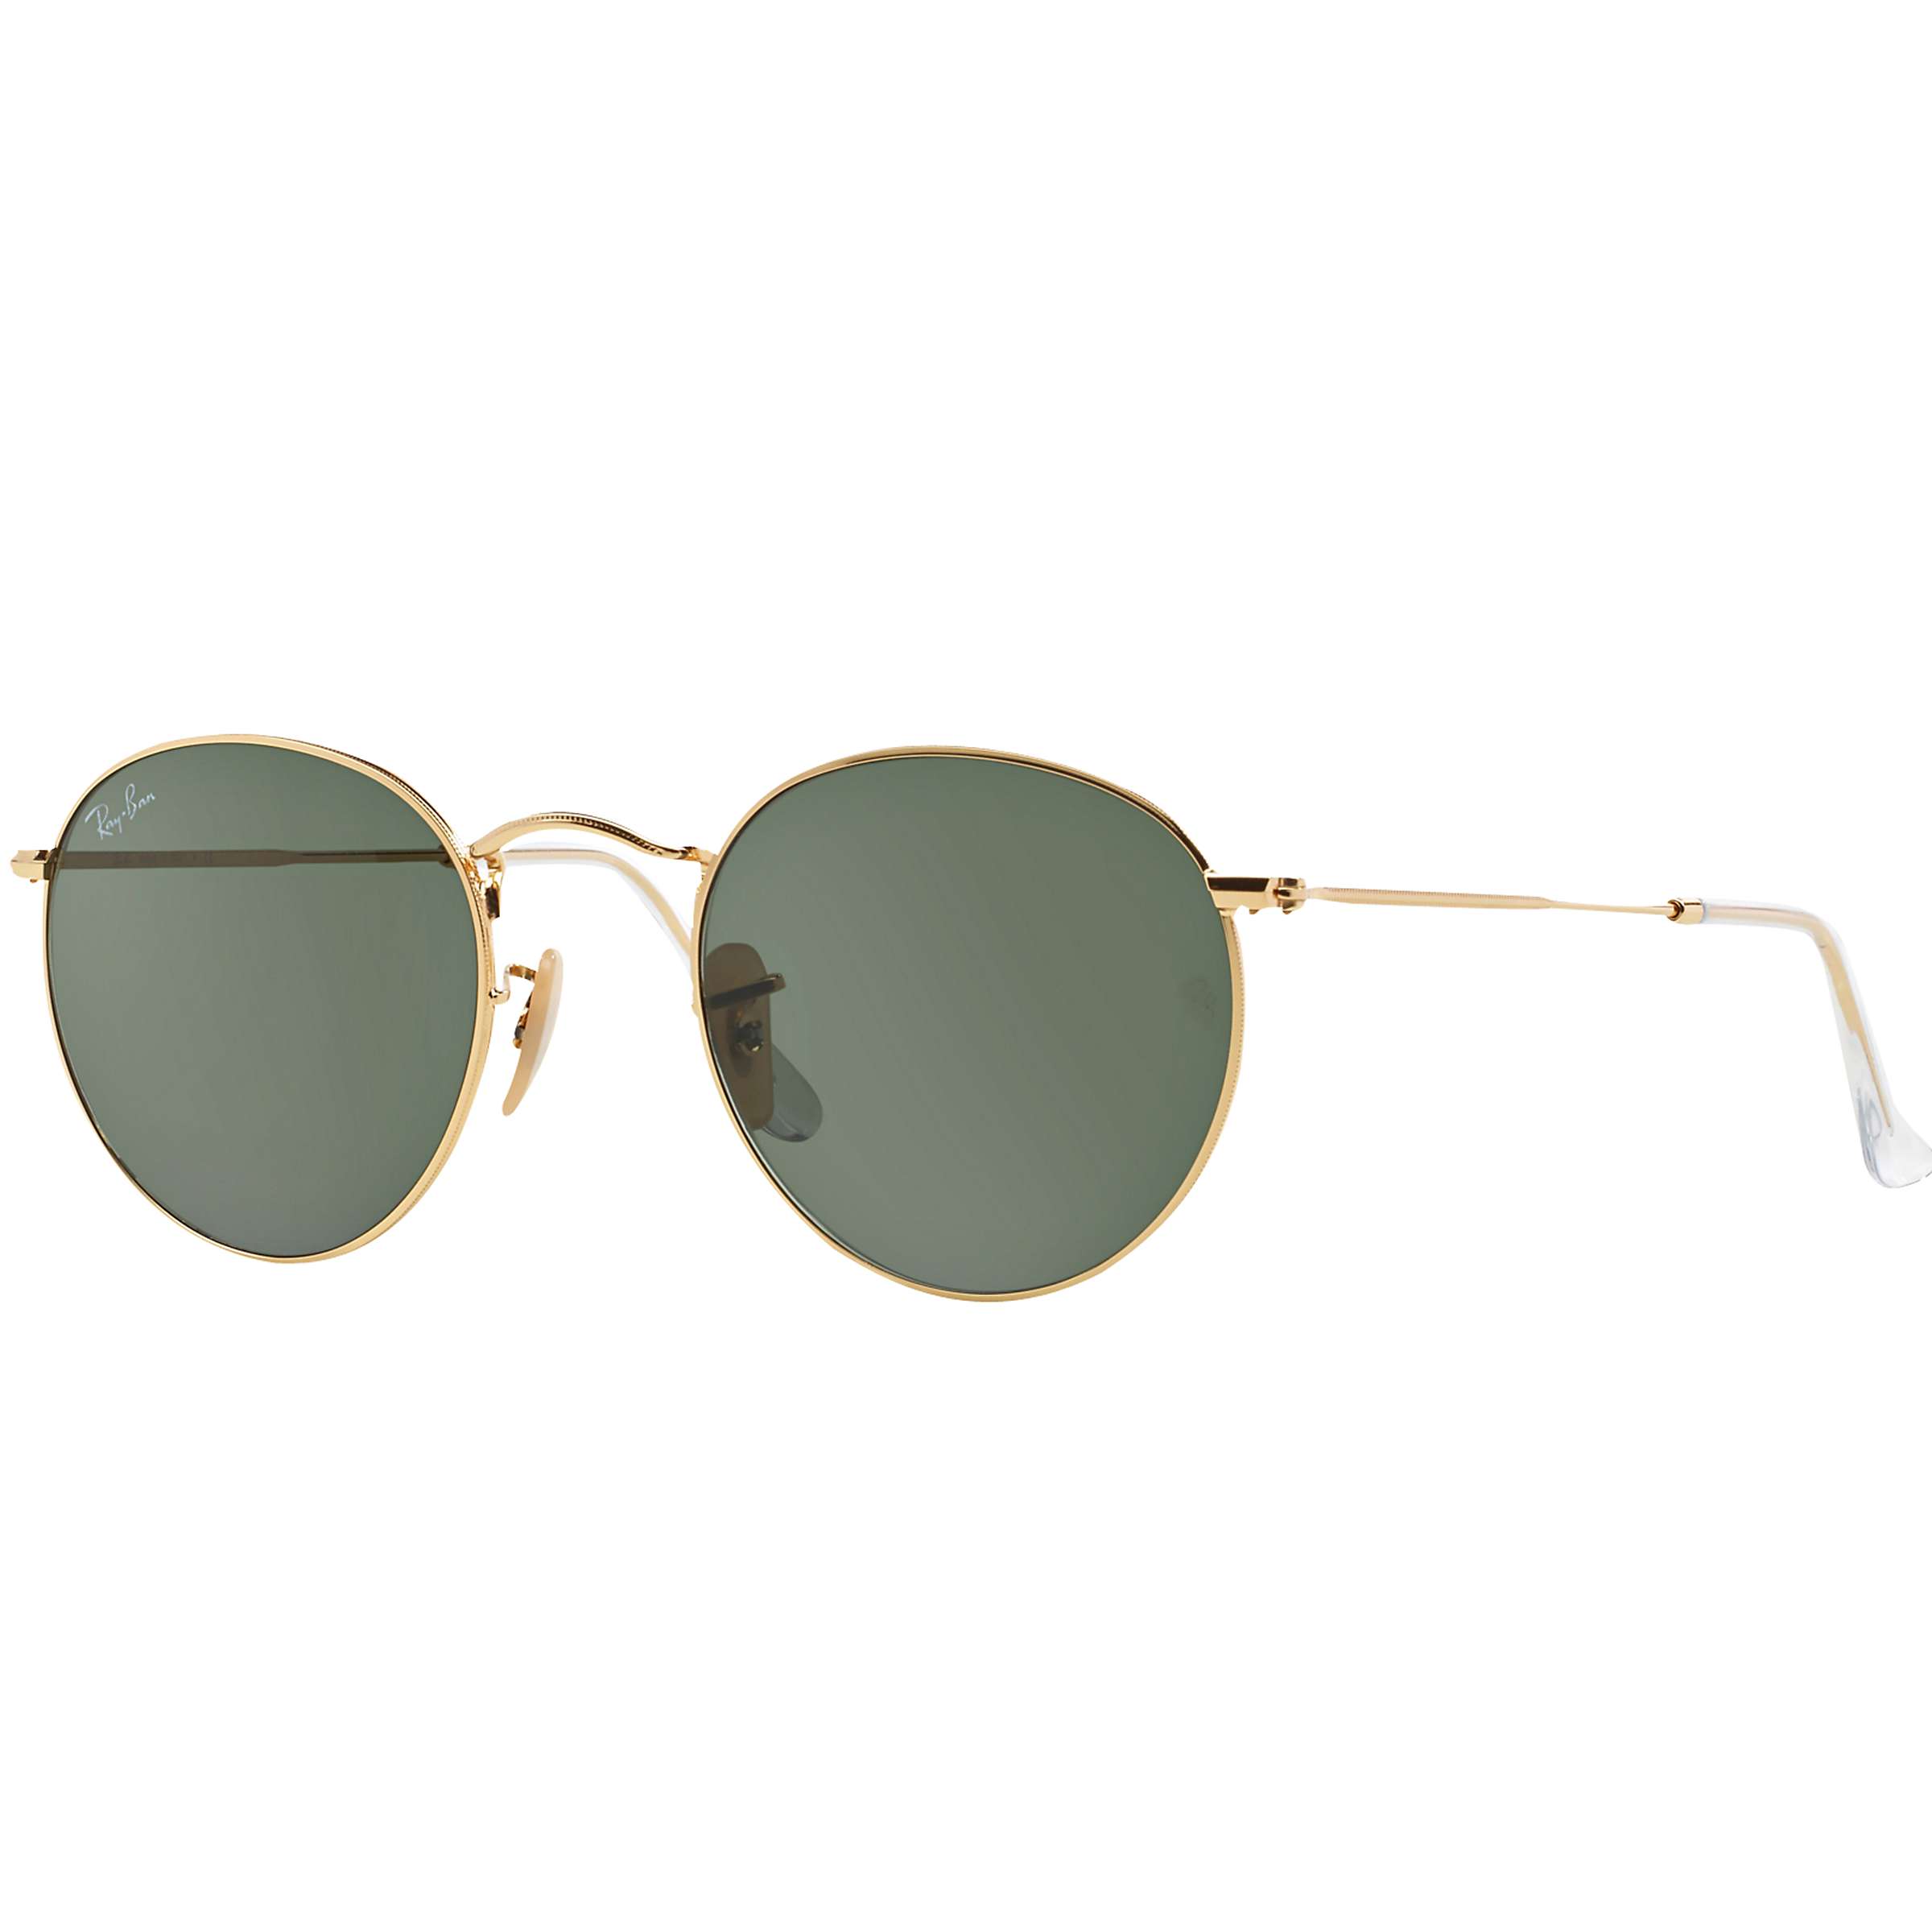 Dignified Seminary Fictitious Ray-Ban RB3447 Round Metal Sunglasses, Gold/Green at John Lewis & Partners